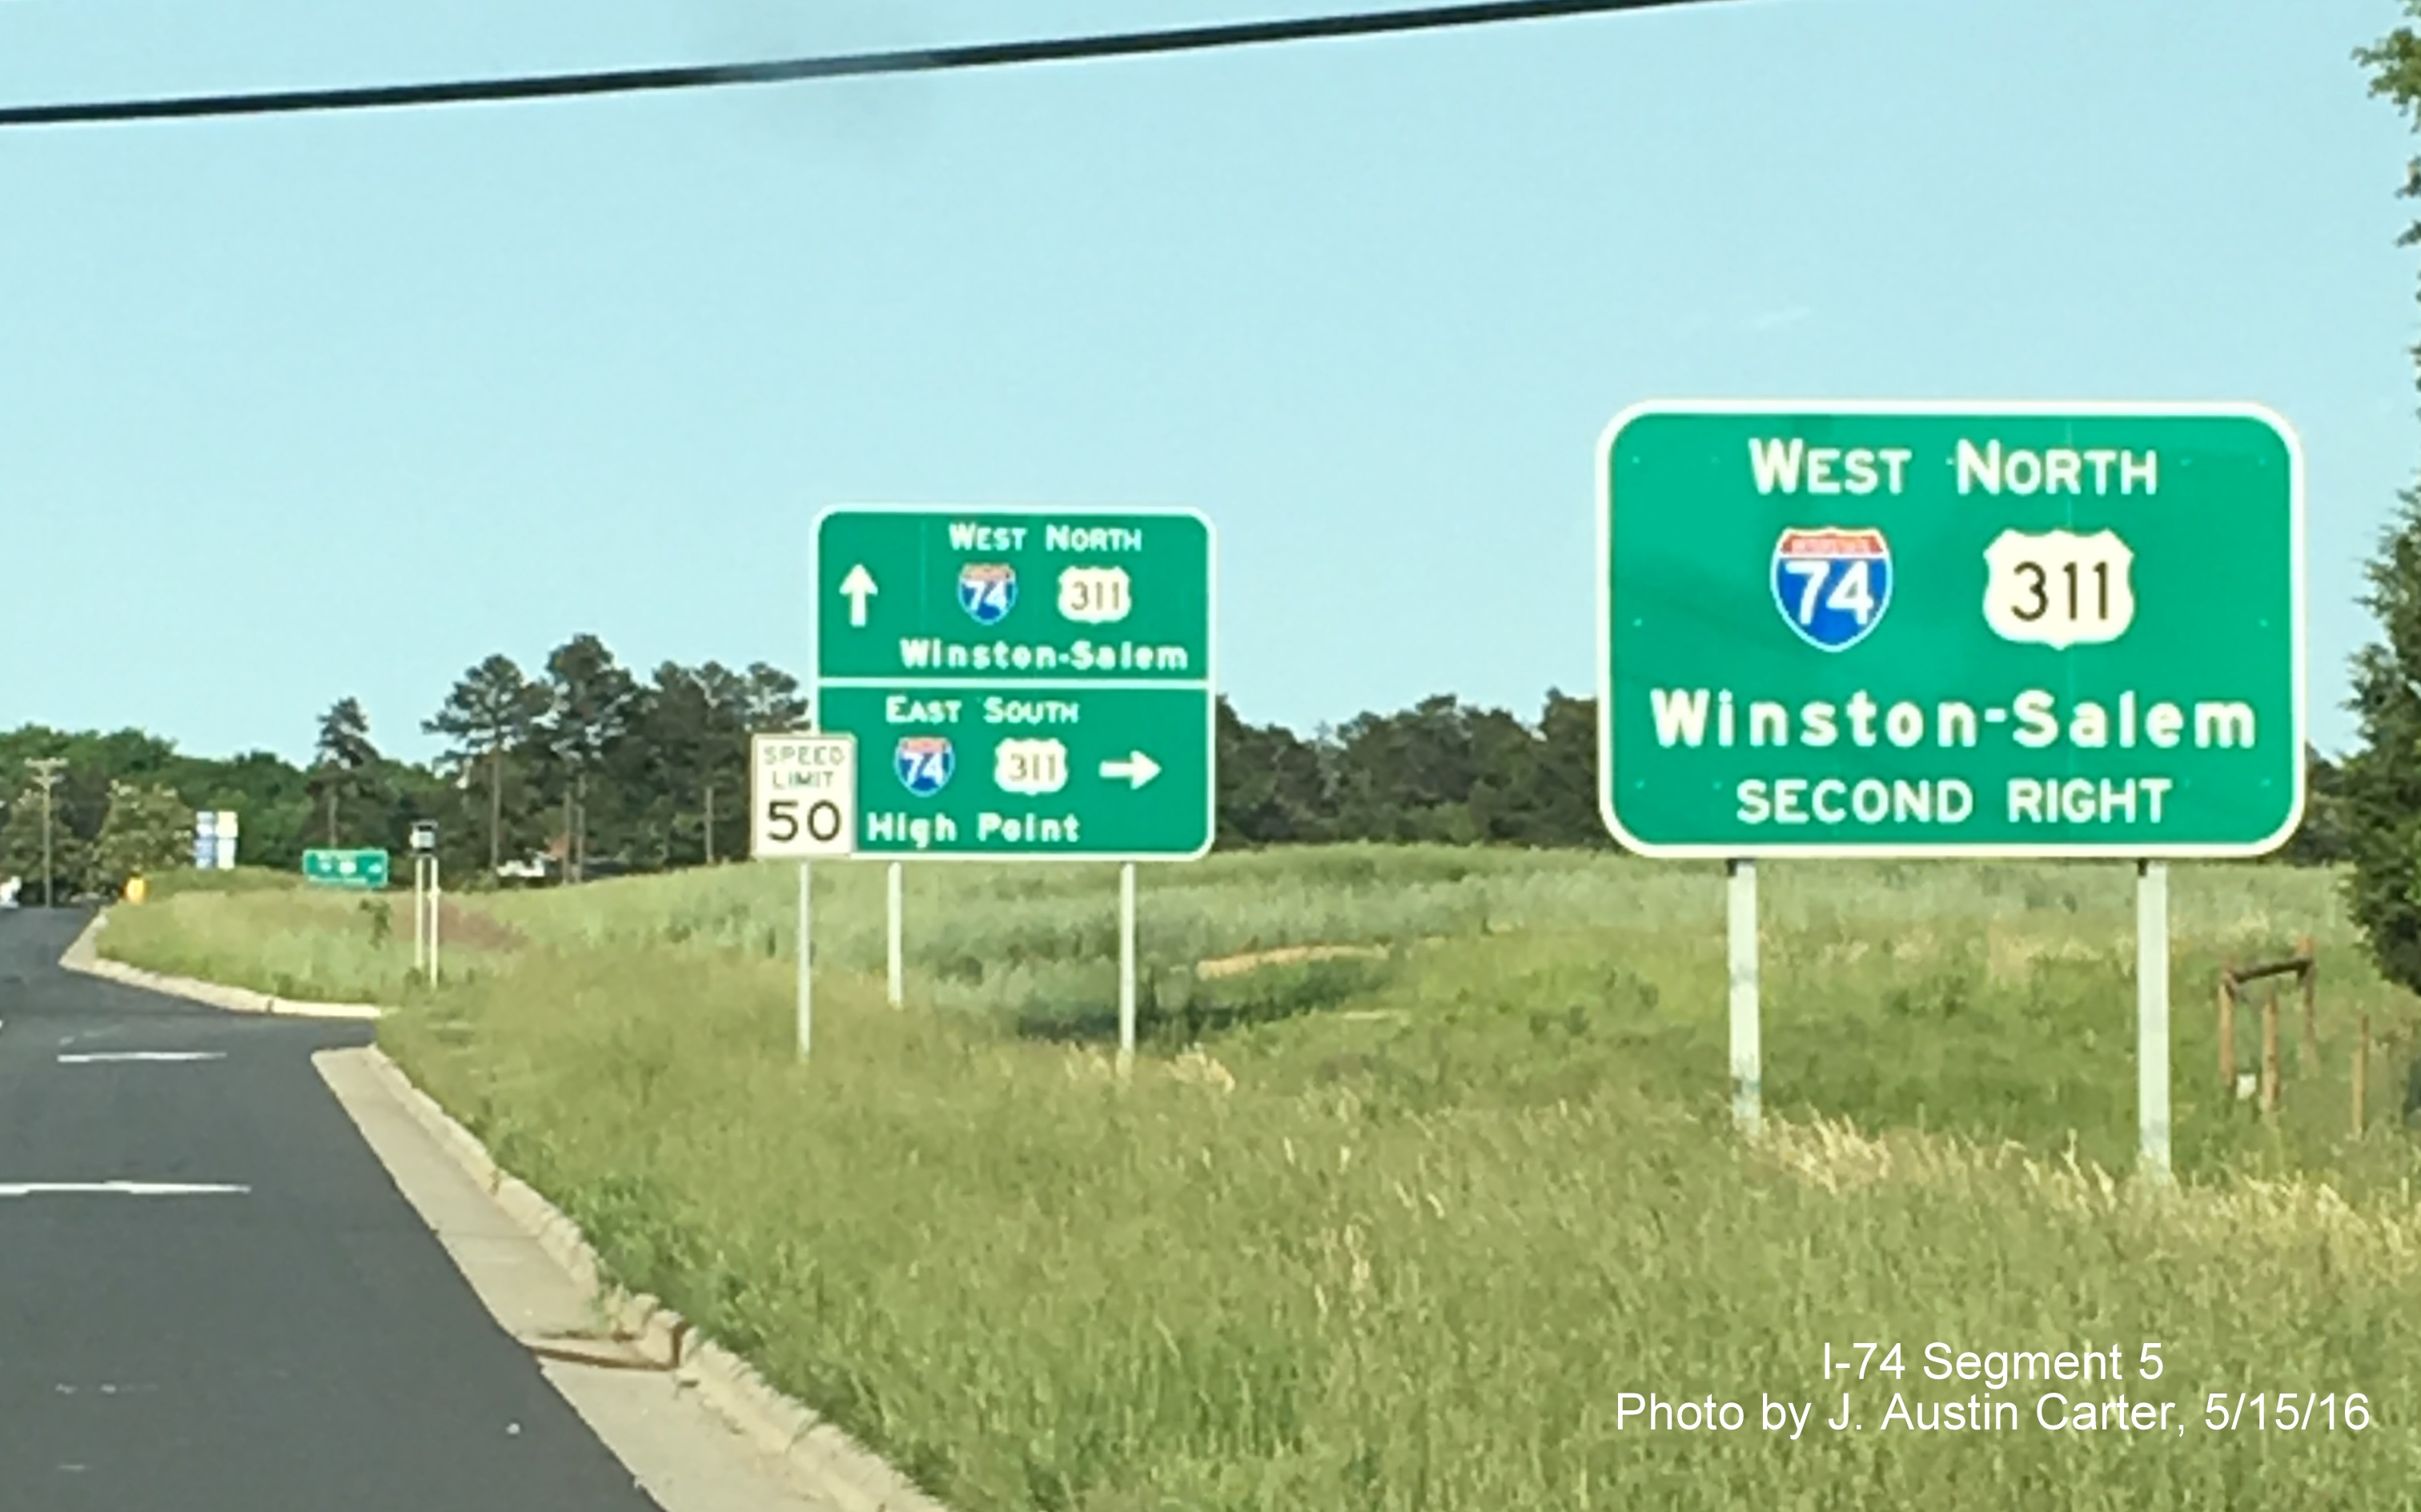 Image of new guide signs for I-74 and US 311 put up on widened Union Cross Rd, from J. Austin Carter